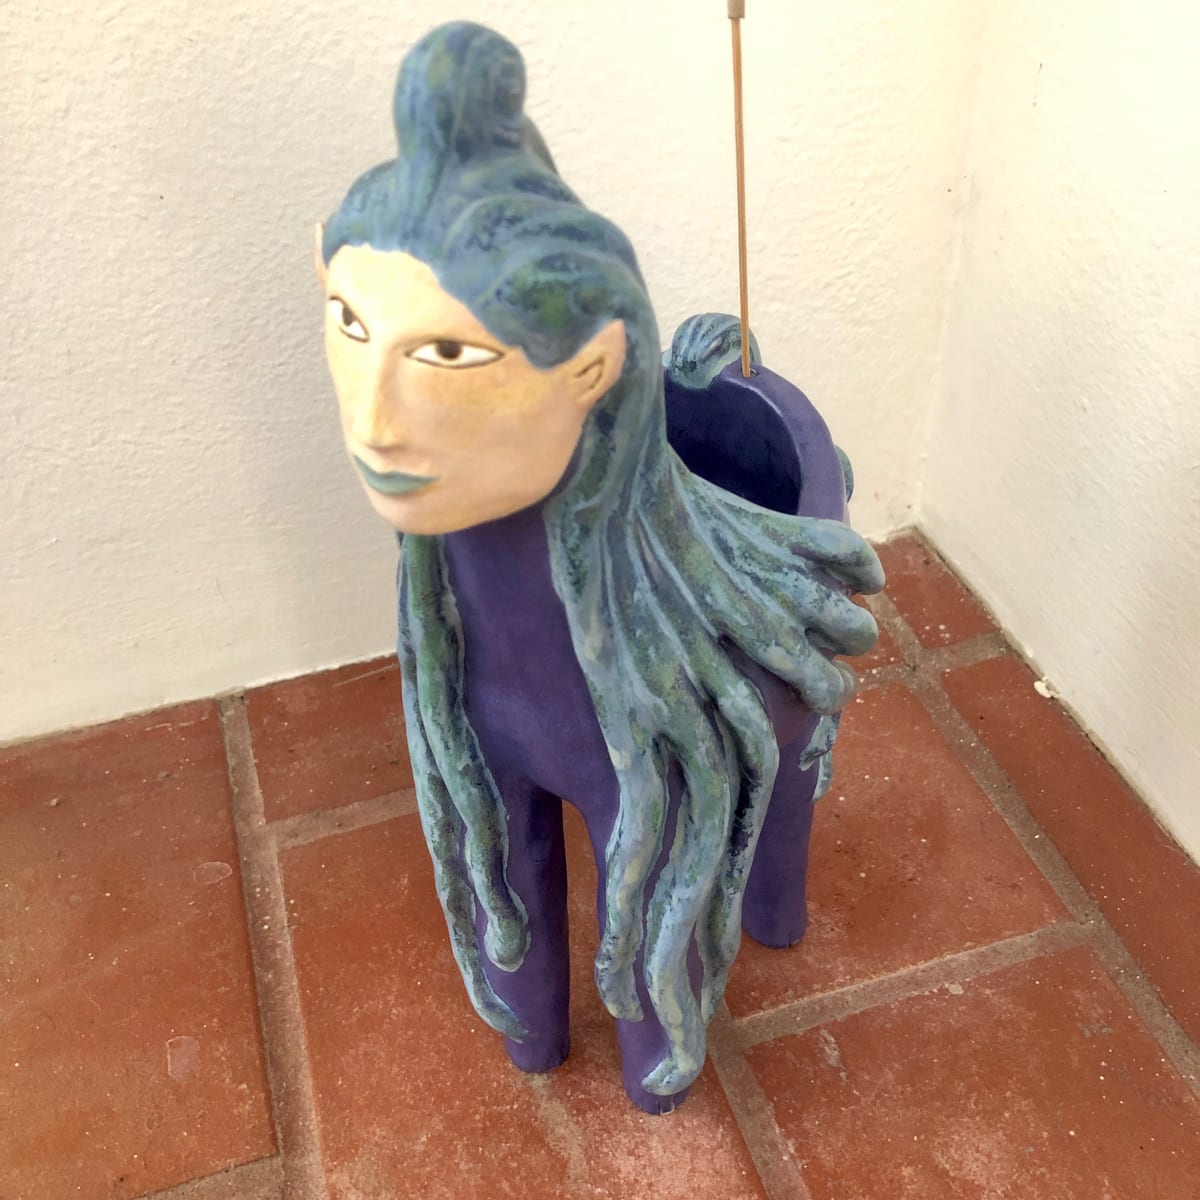 Kalyx Swirl, a dreamy blue haired Incense Holder 